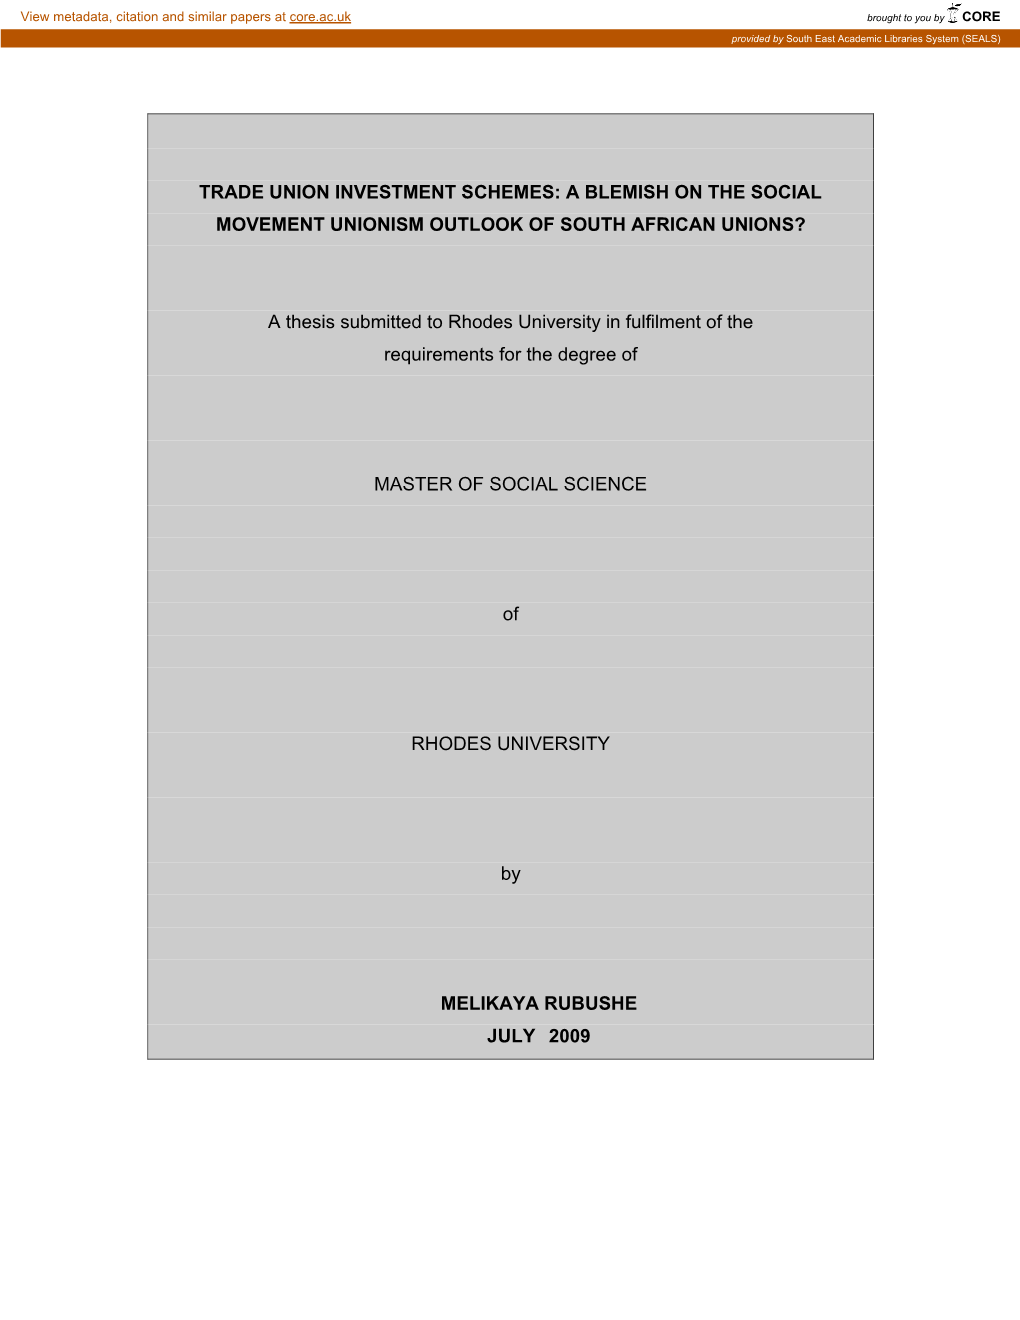 Trade Union Investment Schemes: a Blemish on the Social Movement Unionism Outlook of South African Unions?